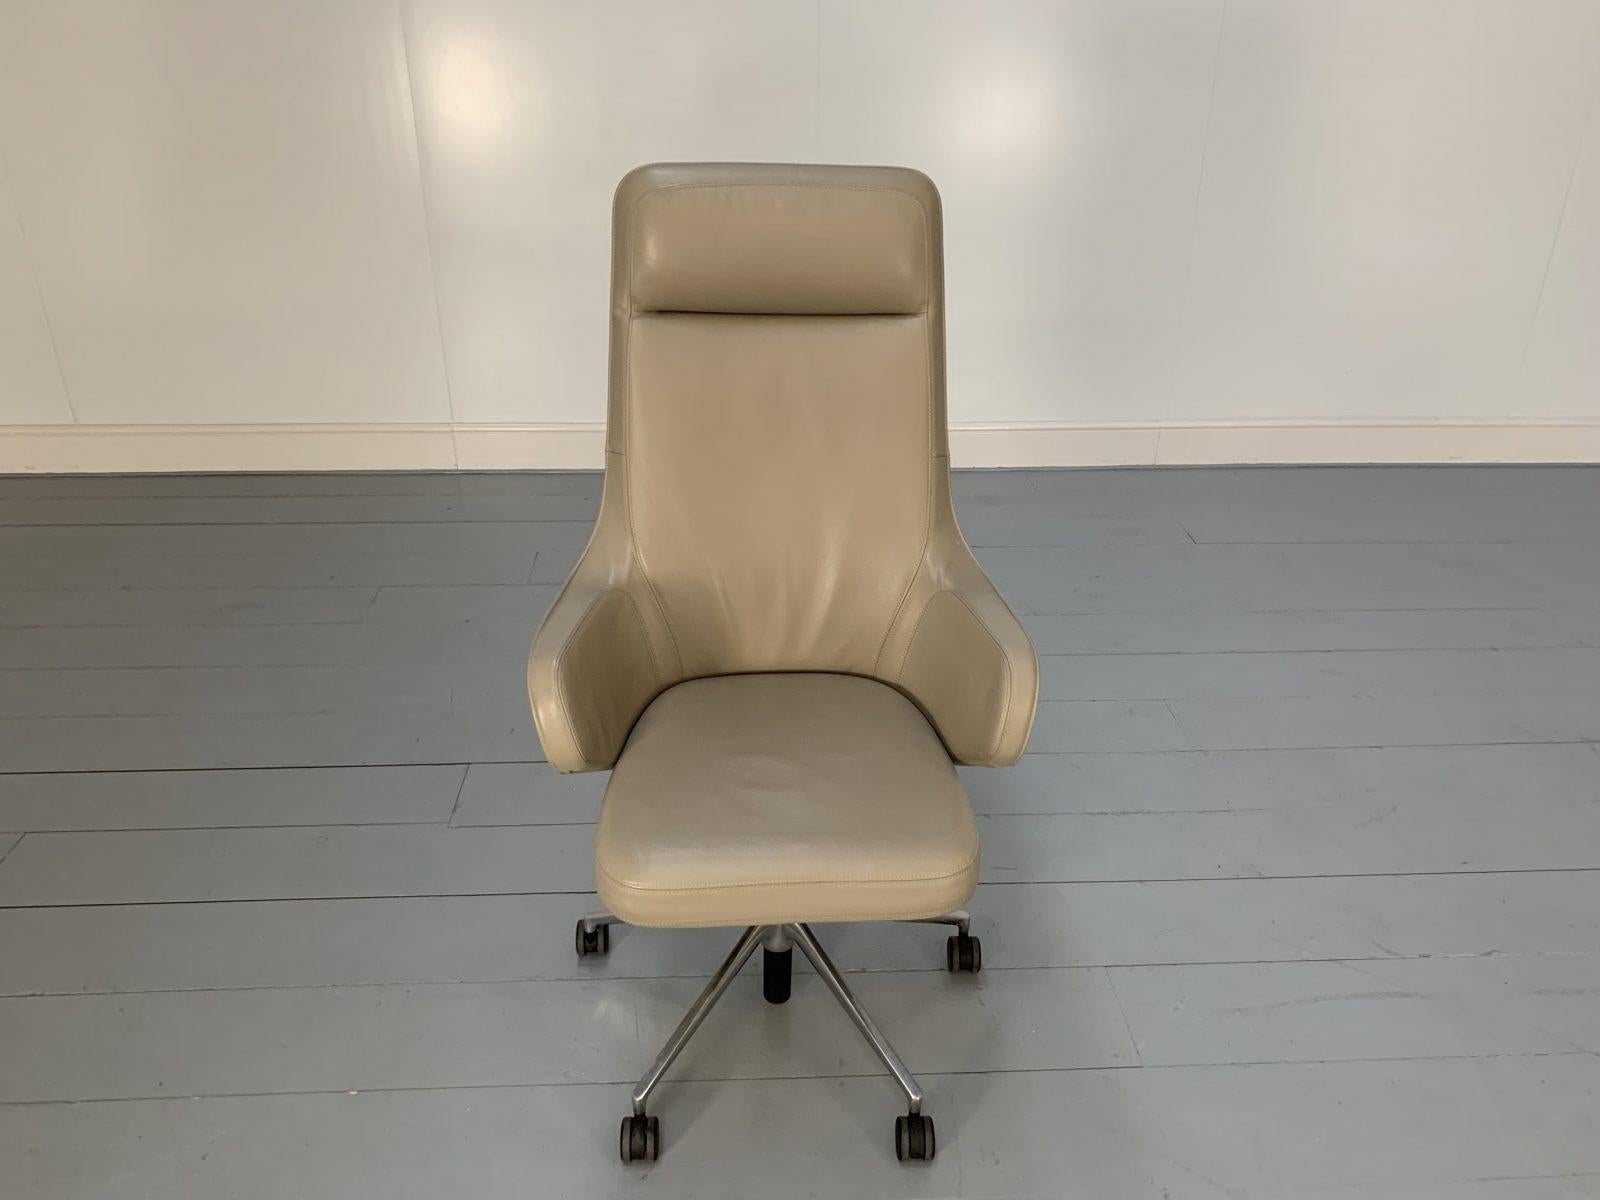 Vitra “Grand Executive” Office Armchair Chair in “Premium” Sand Leather 2